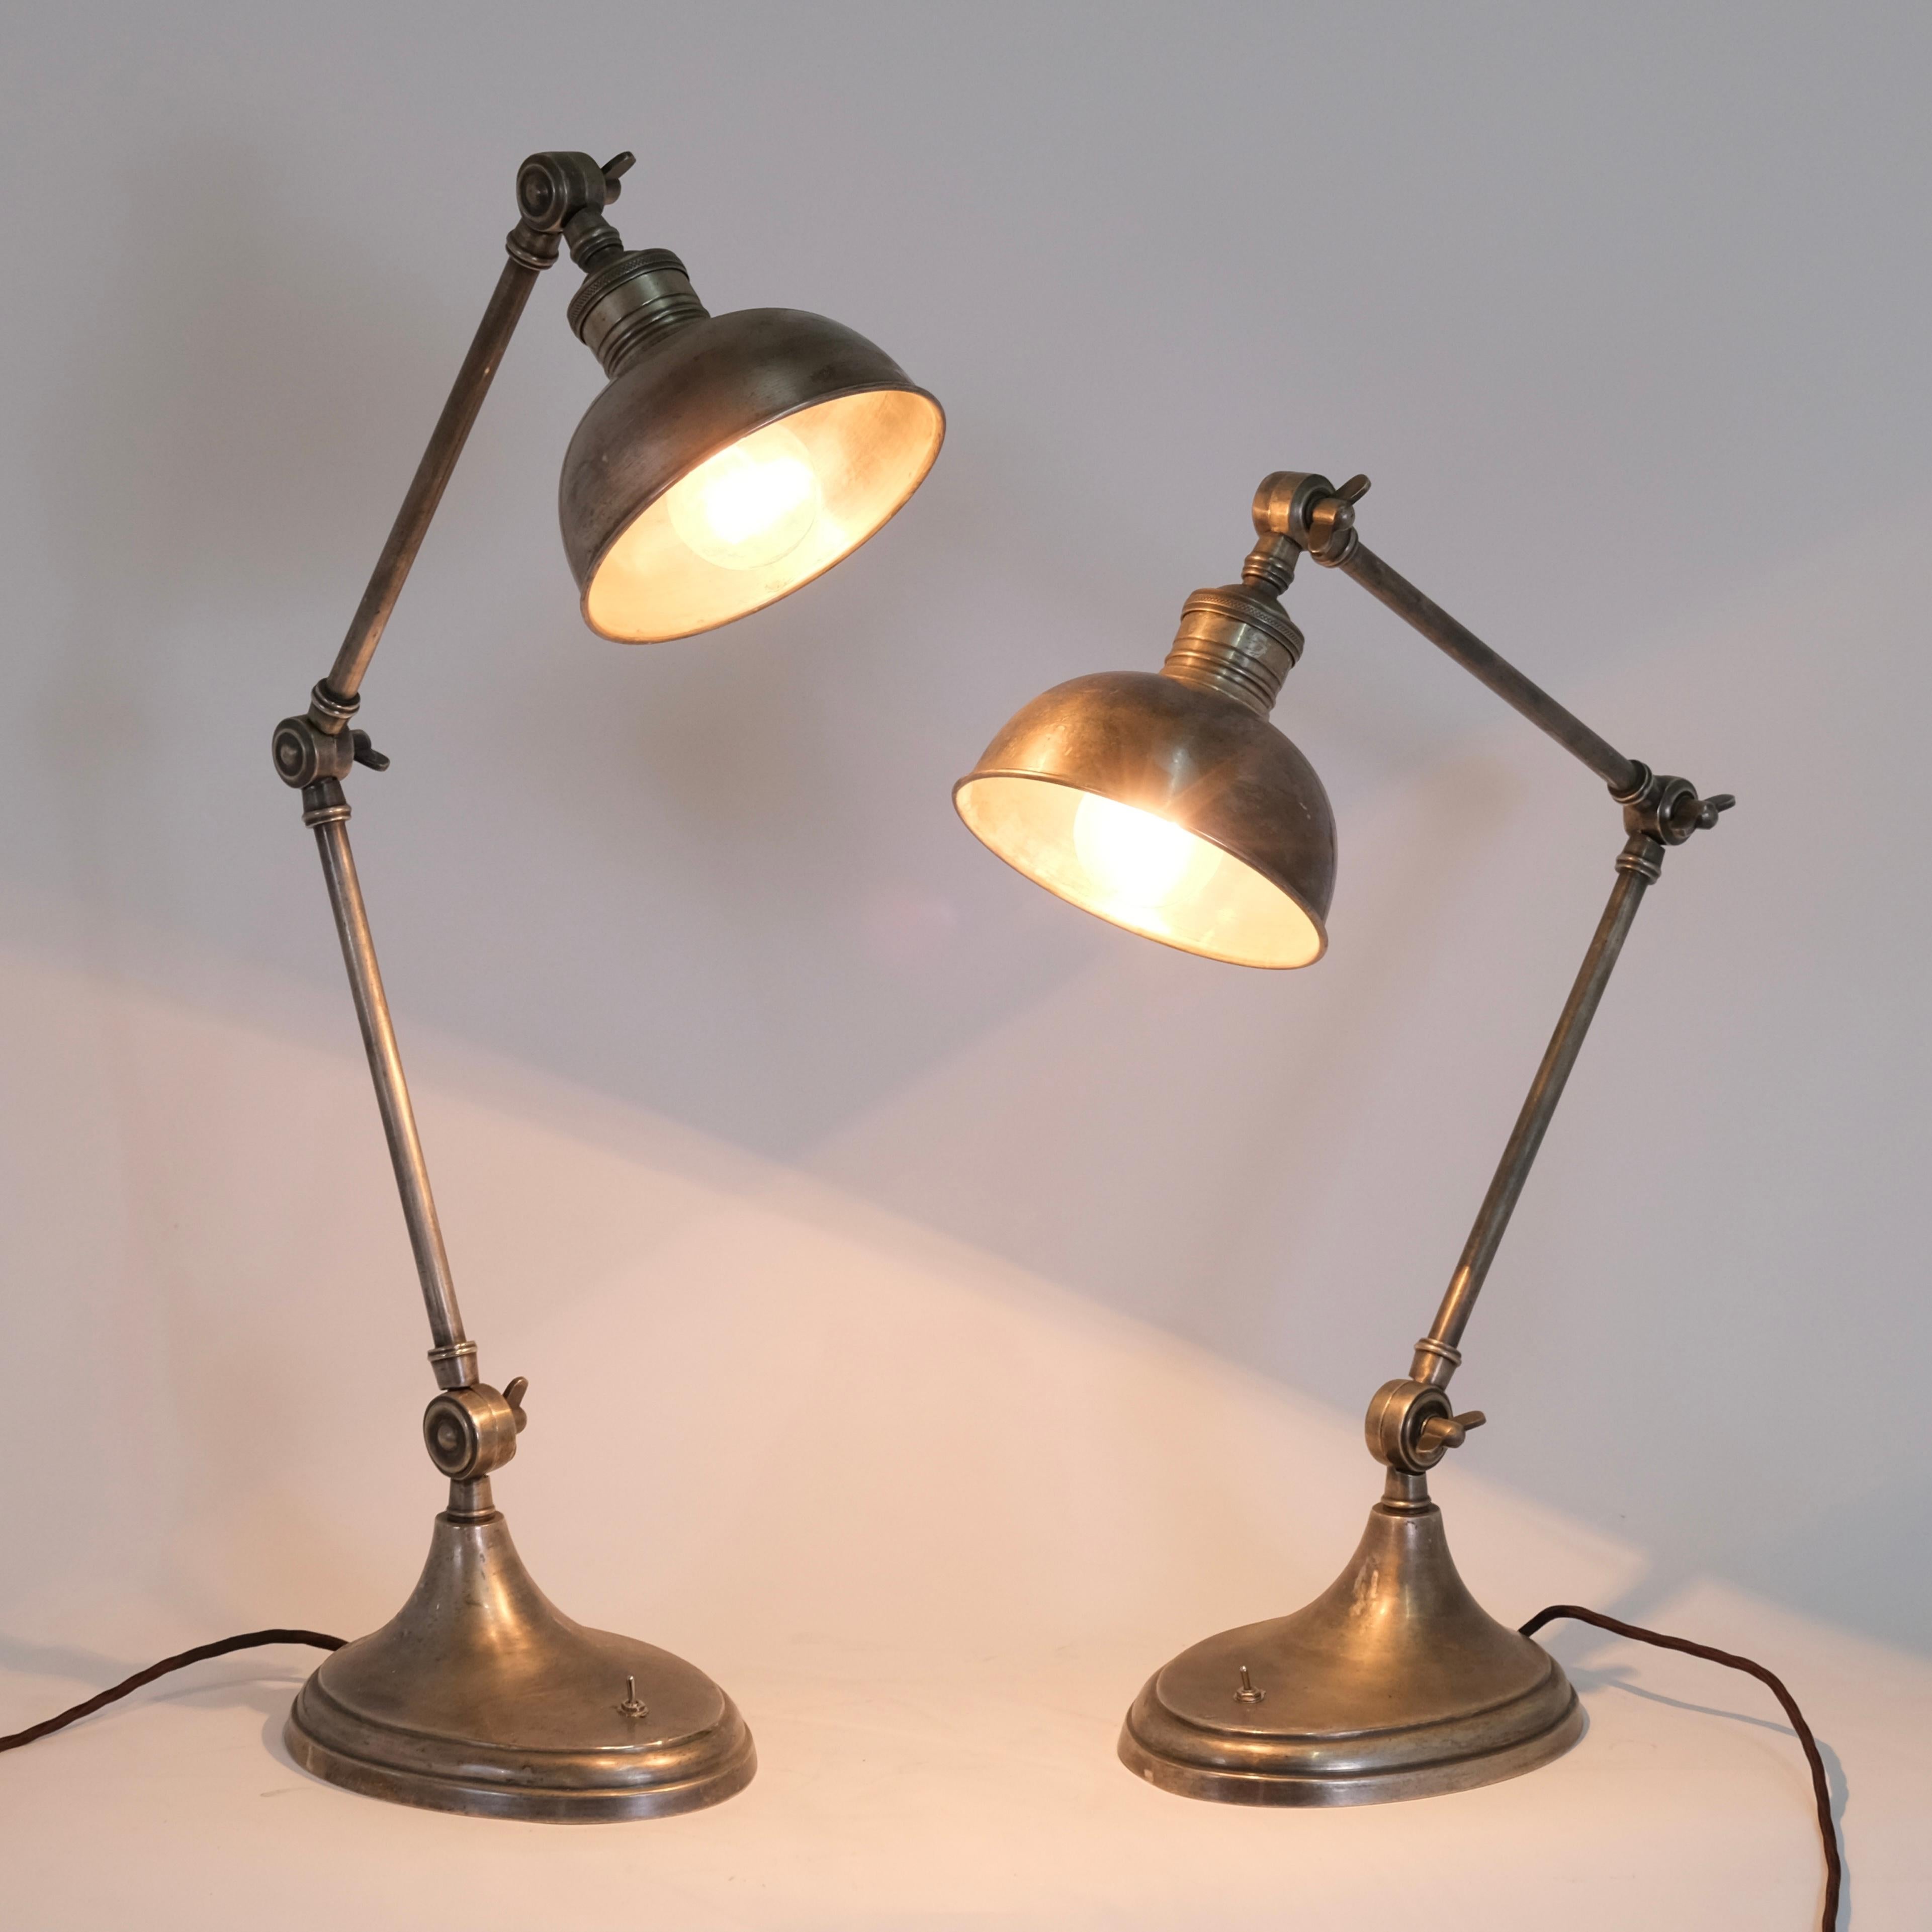 Two table lamps with flexible arms
Metal with original patina

Mid Century, 1950/60s

Dimensions:
Base: 20x16 cm
Height: 48-67 cm
Diameter Shade: 15 cm
Socket: E27 